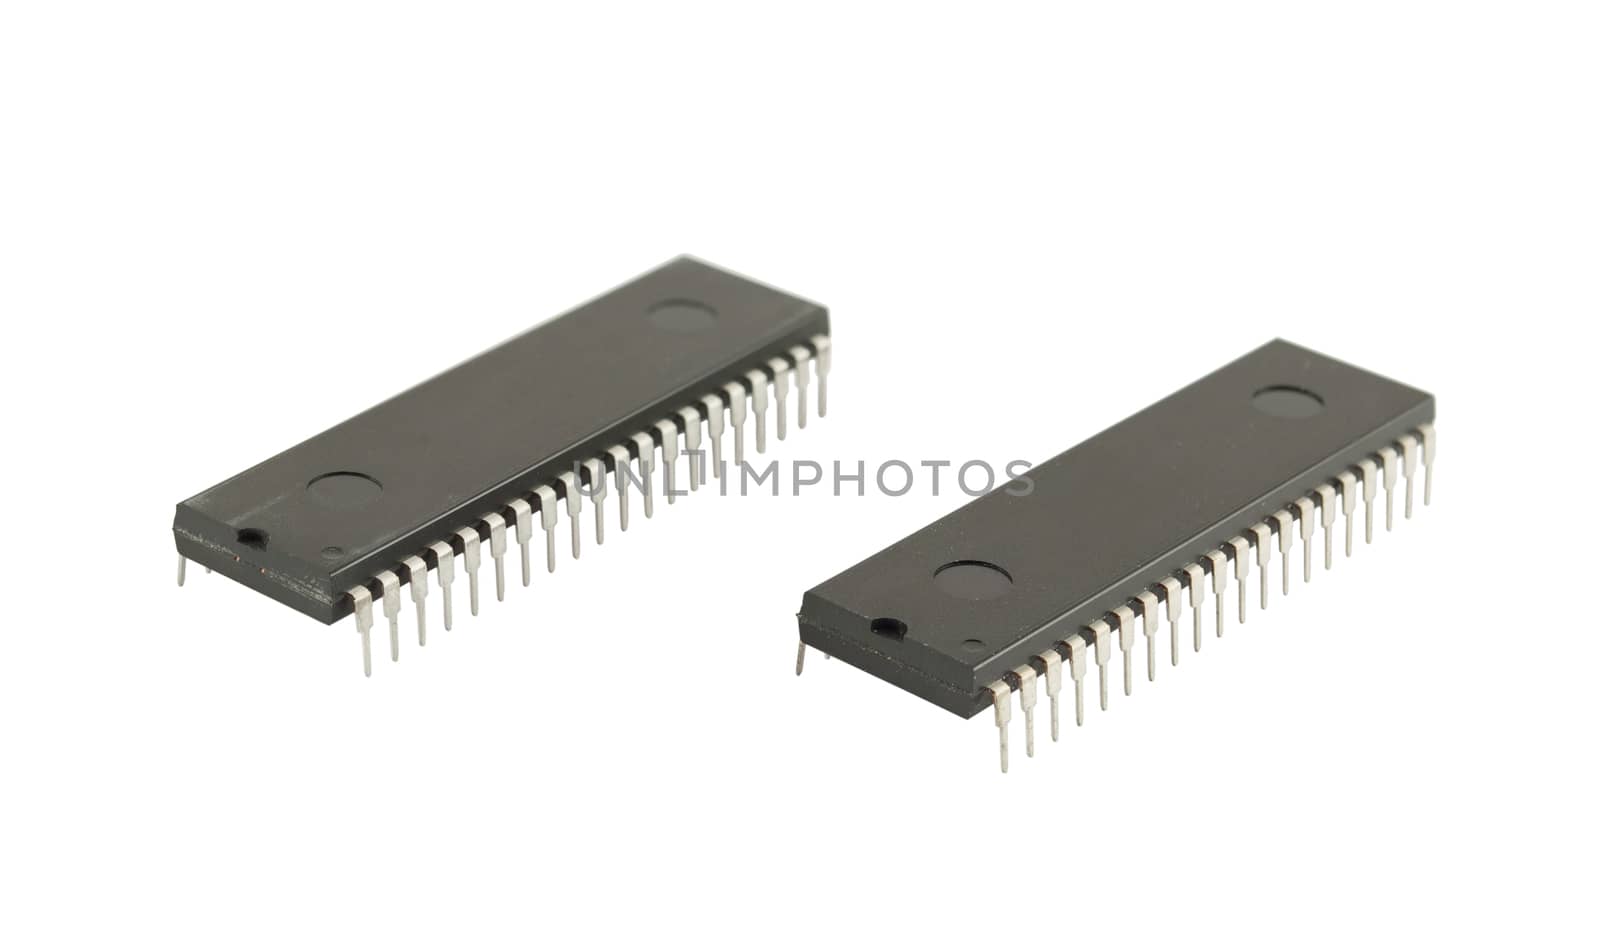 Two integrated circuits isolated on the white background